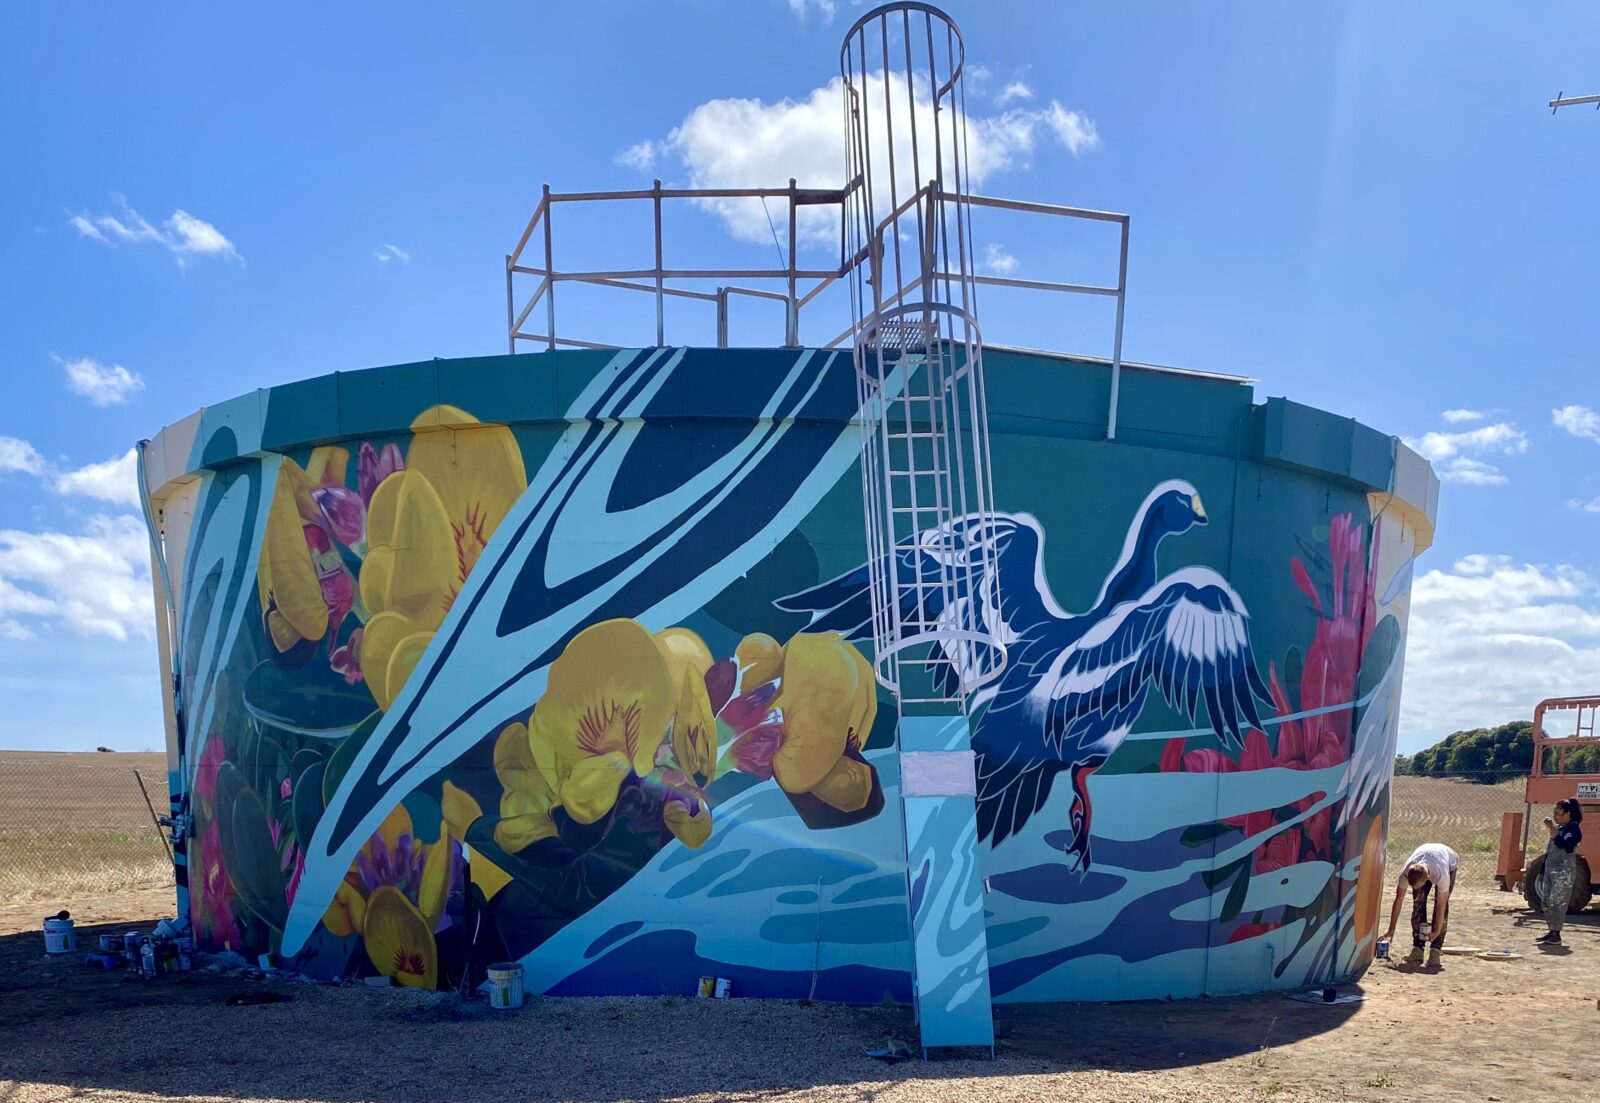 Water Tank covered in mural of local birdlife. Access ladder visible.